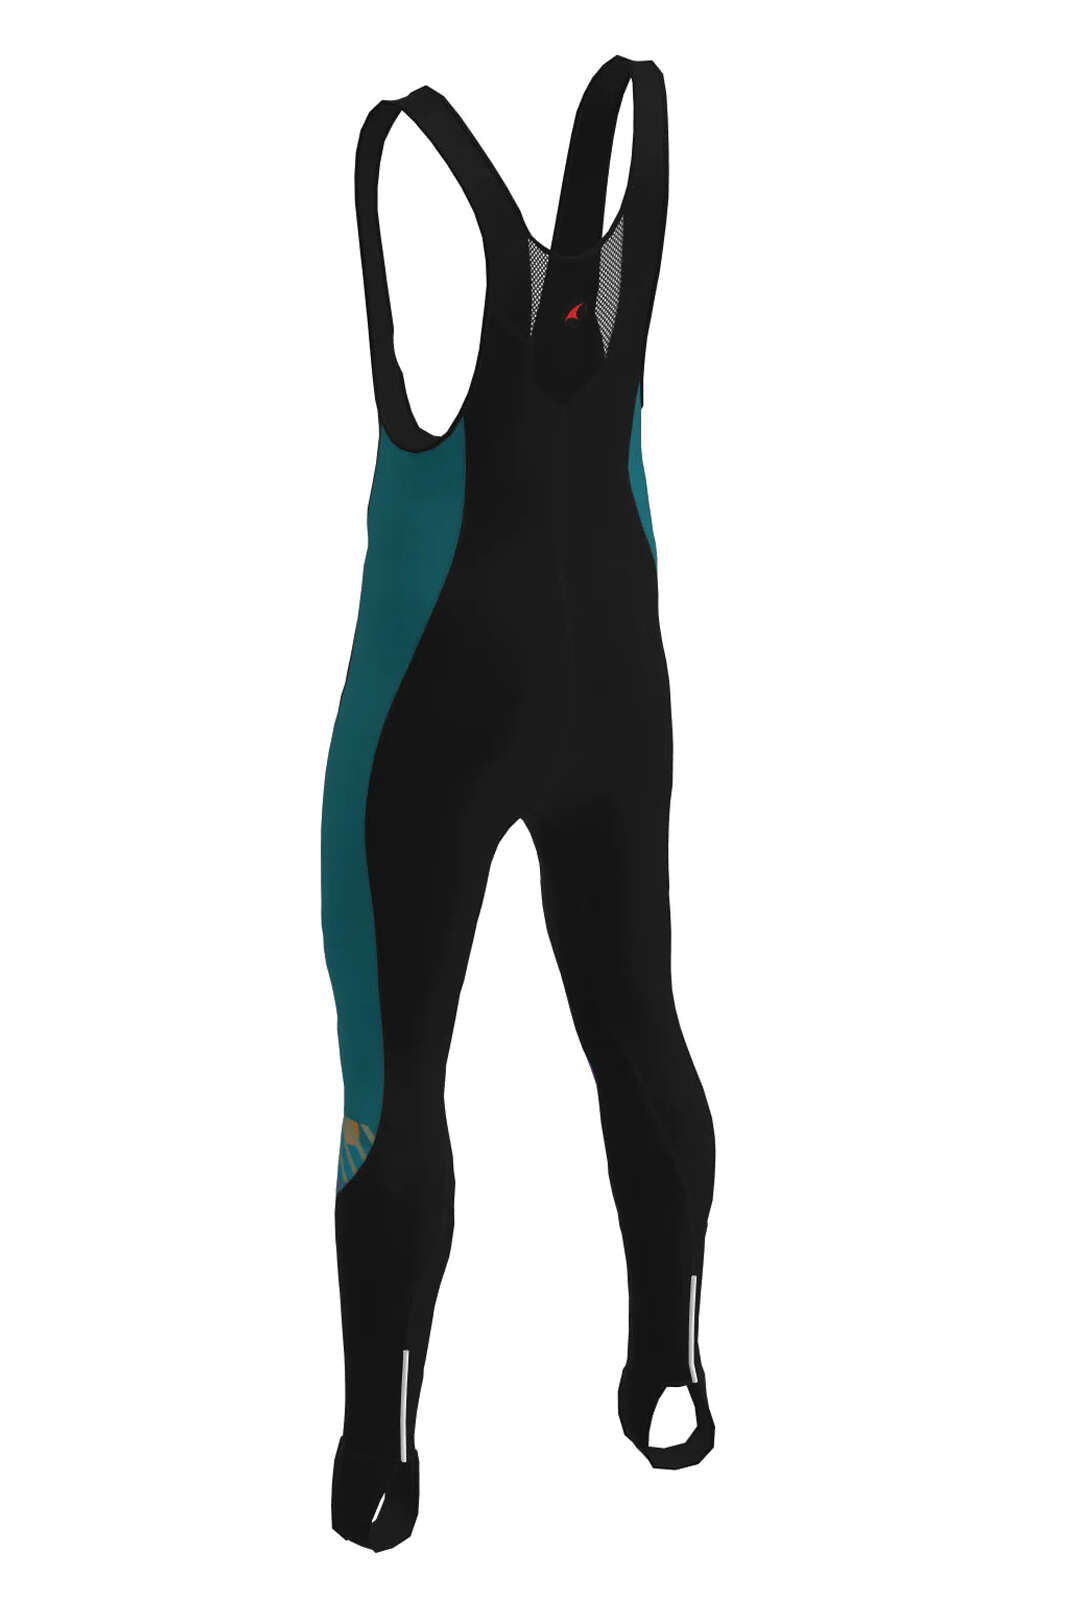 Men's Custom Thermal Bib Tights - Ouray Back View